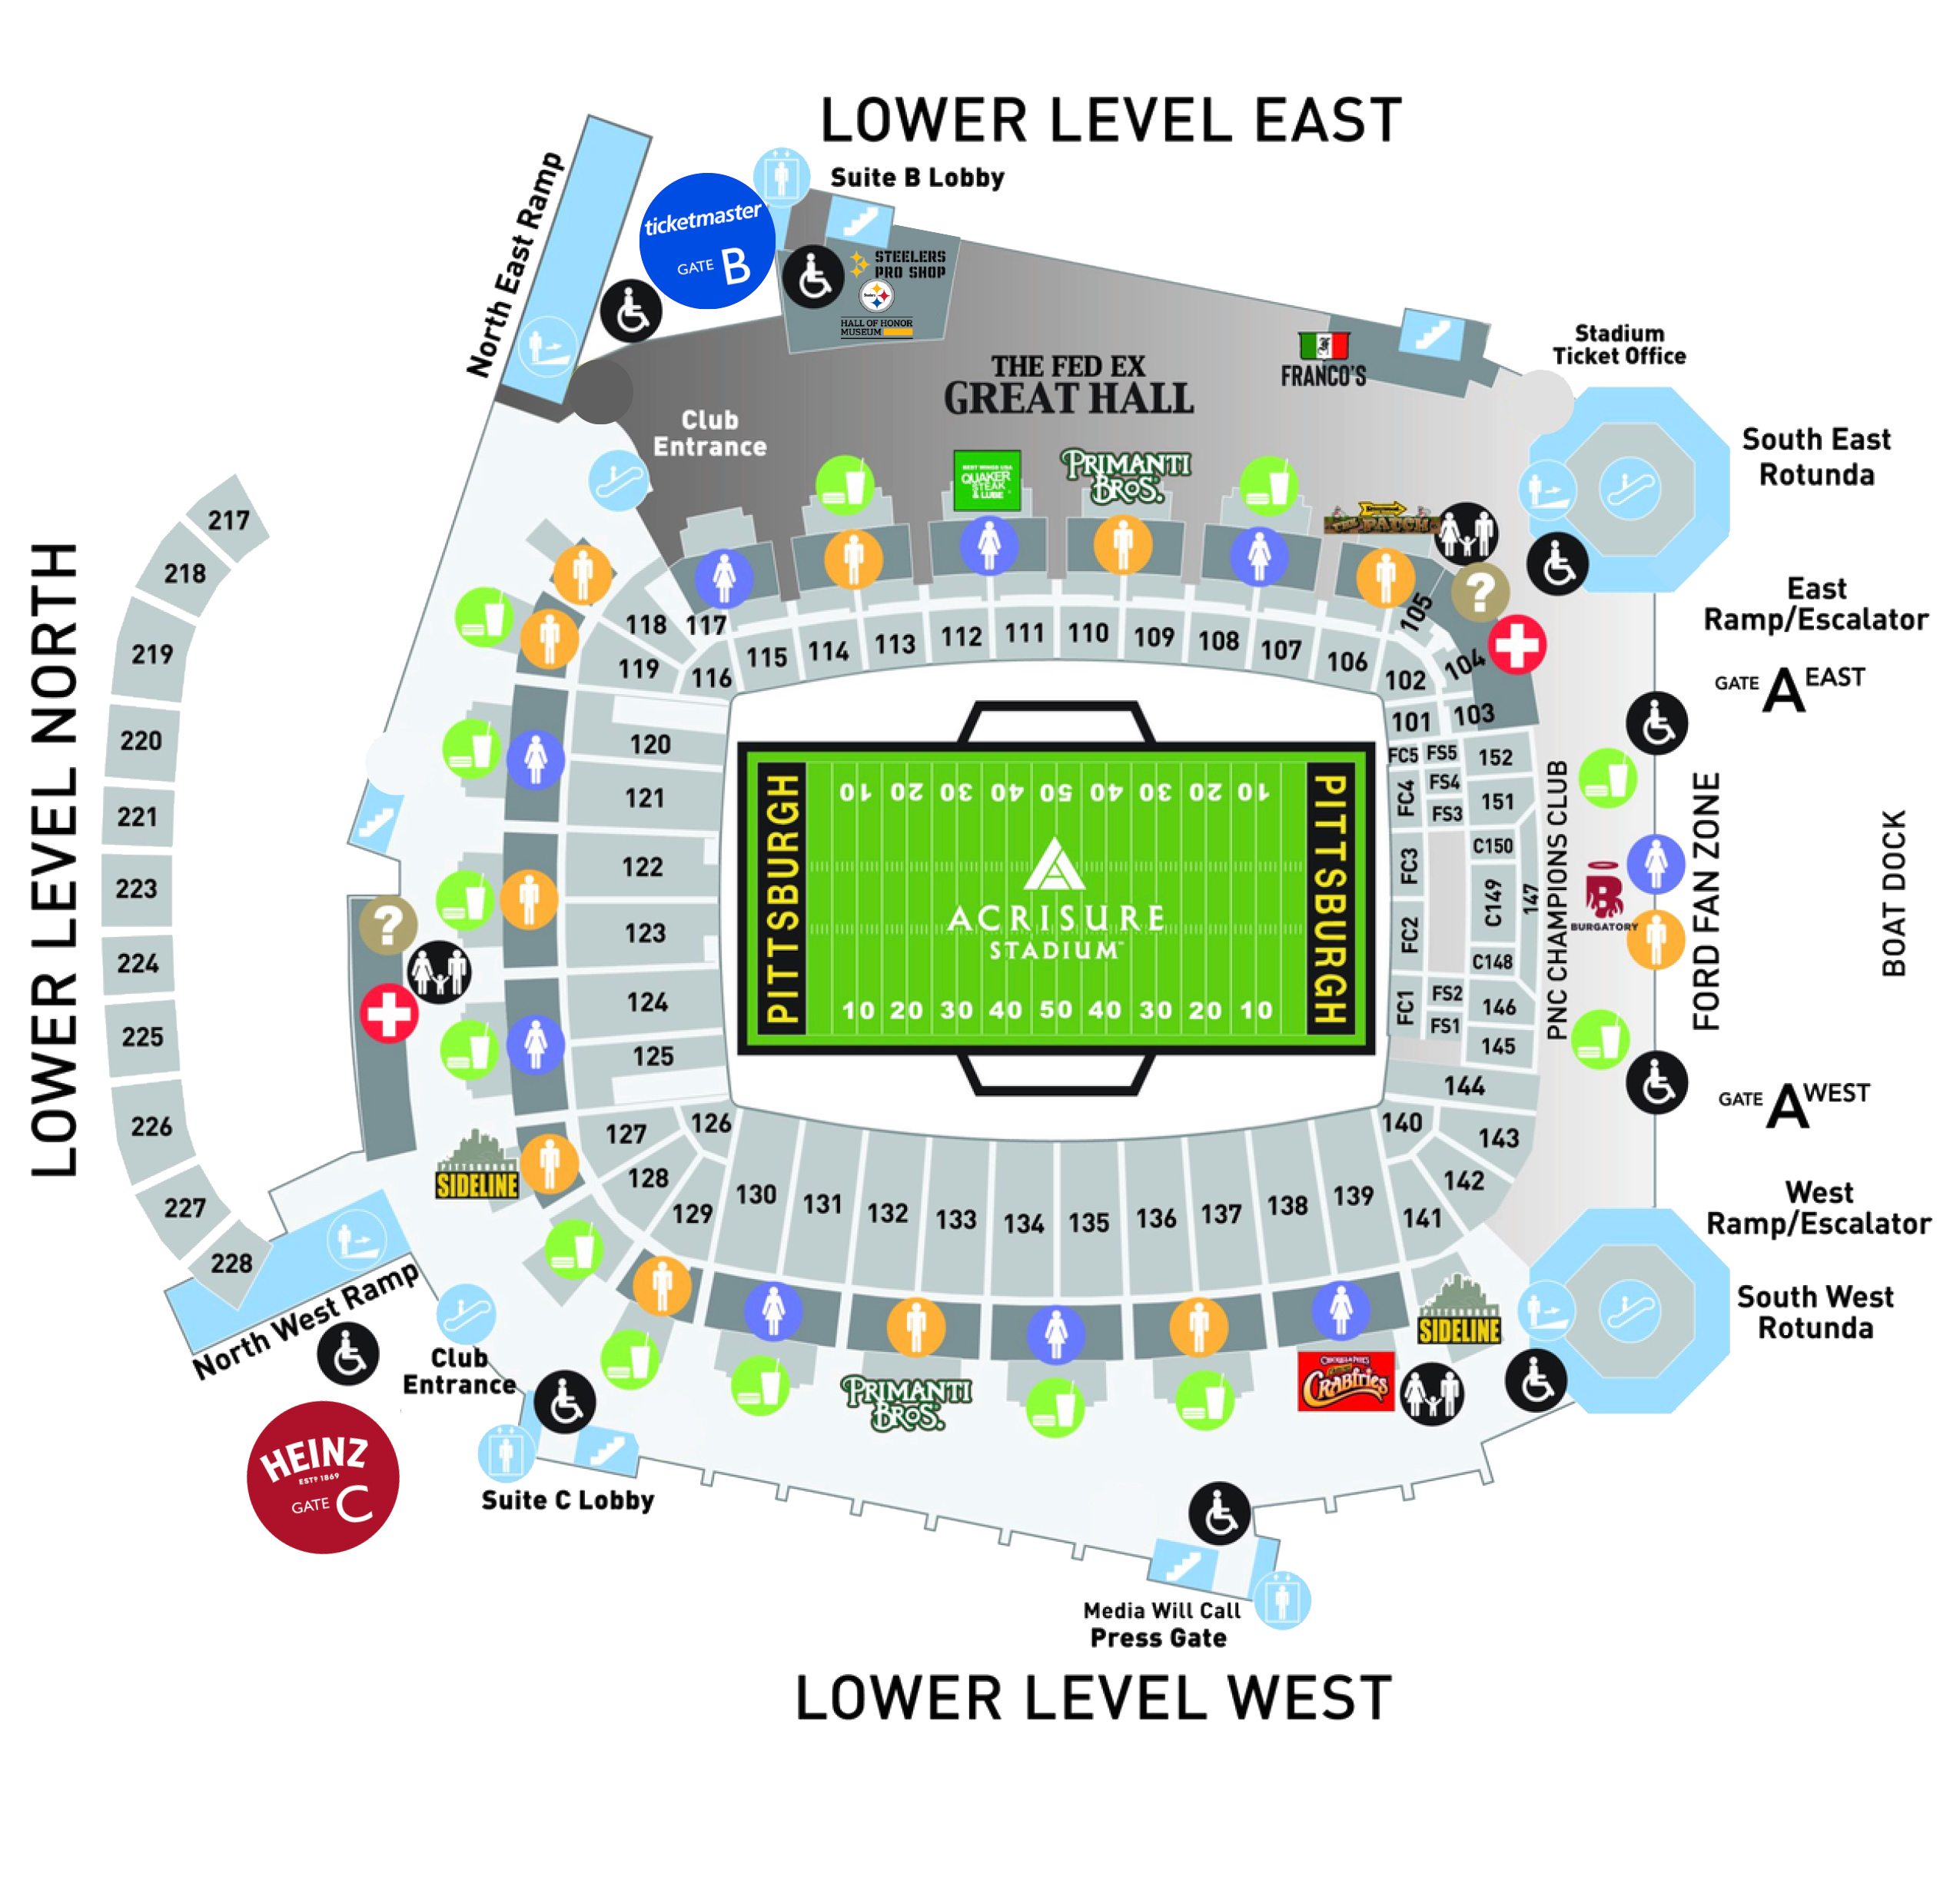 PNC Park Seating Chart & Map